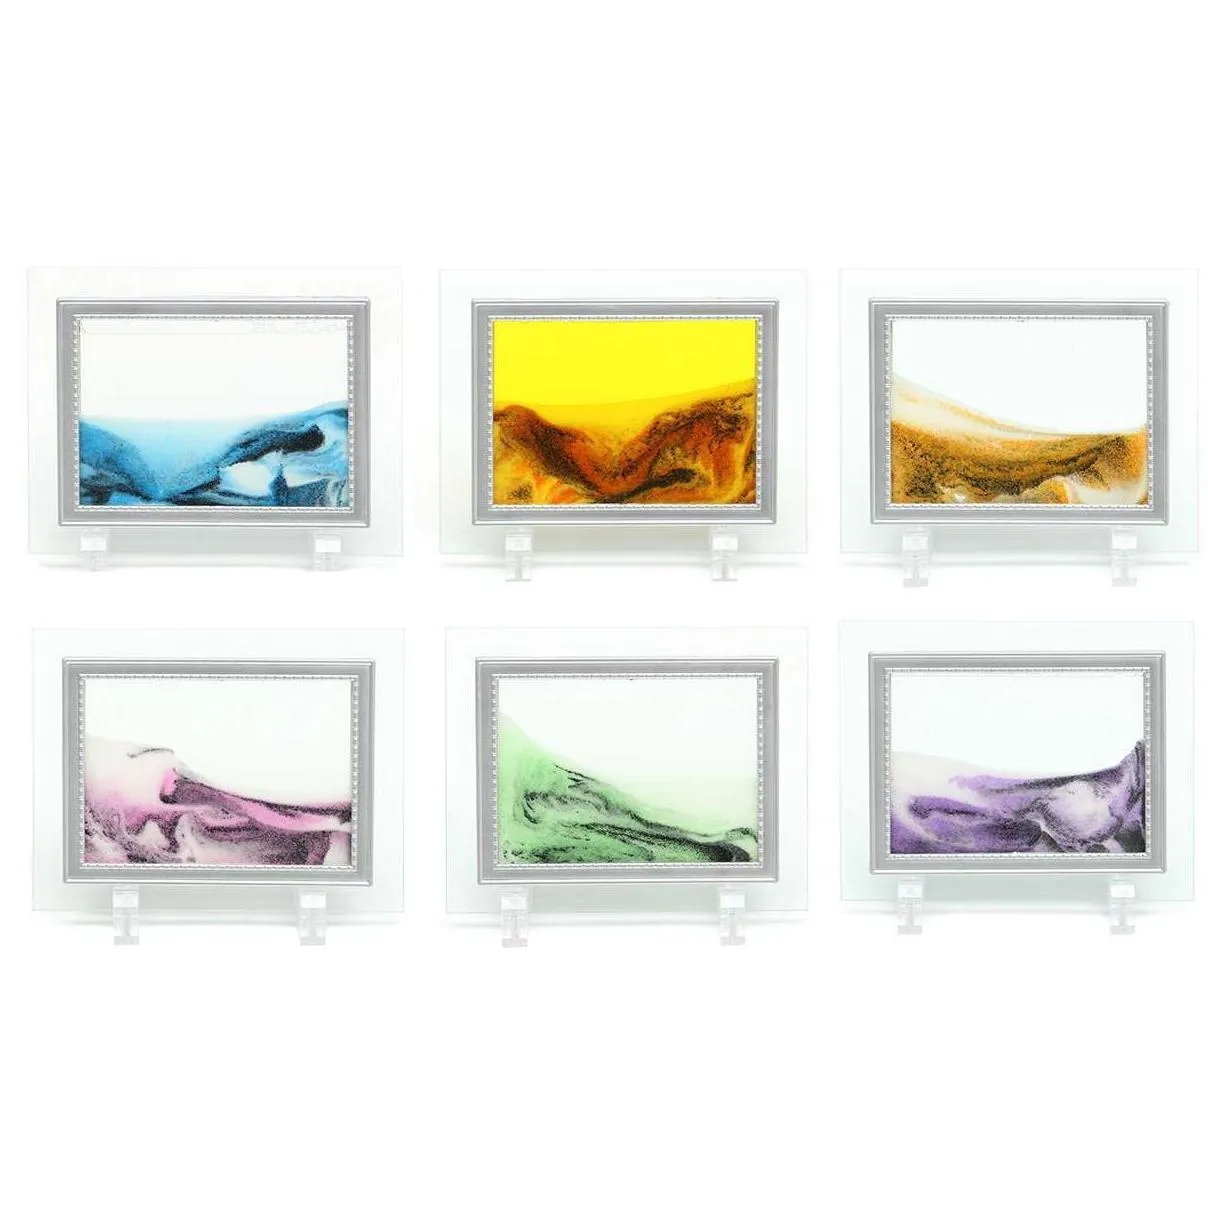 13x17cm framed moving sand time liquid landscape glass picture home office ornaments decoration accessories craft art gift lj200904